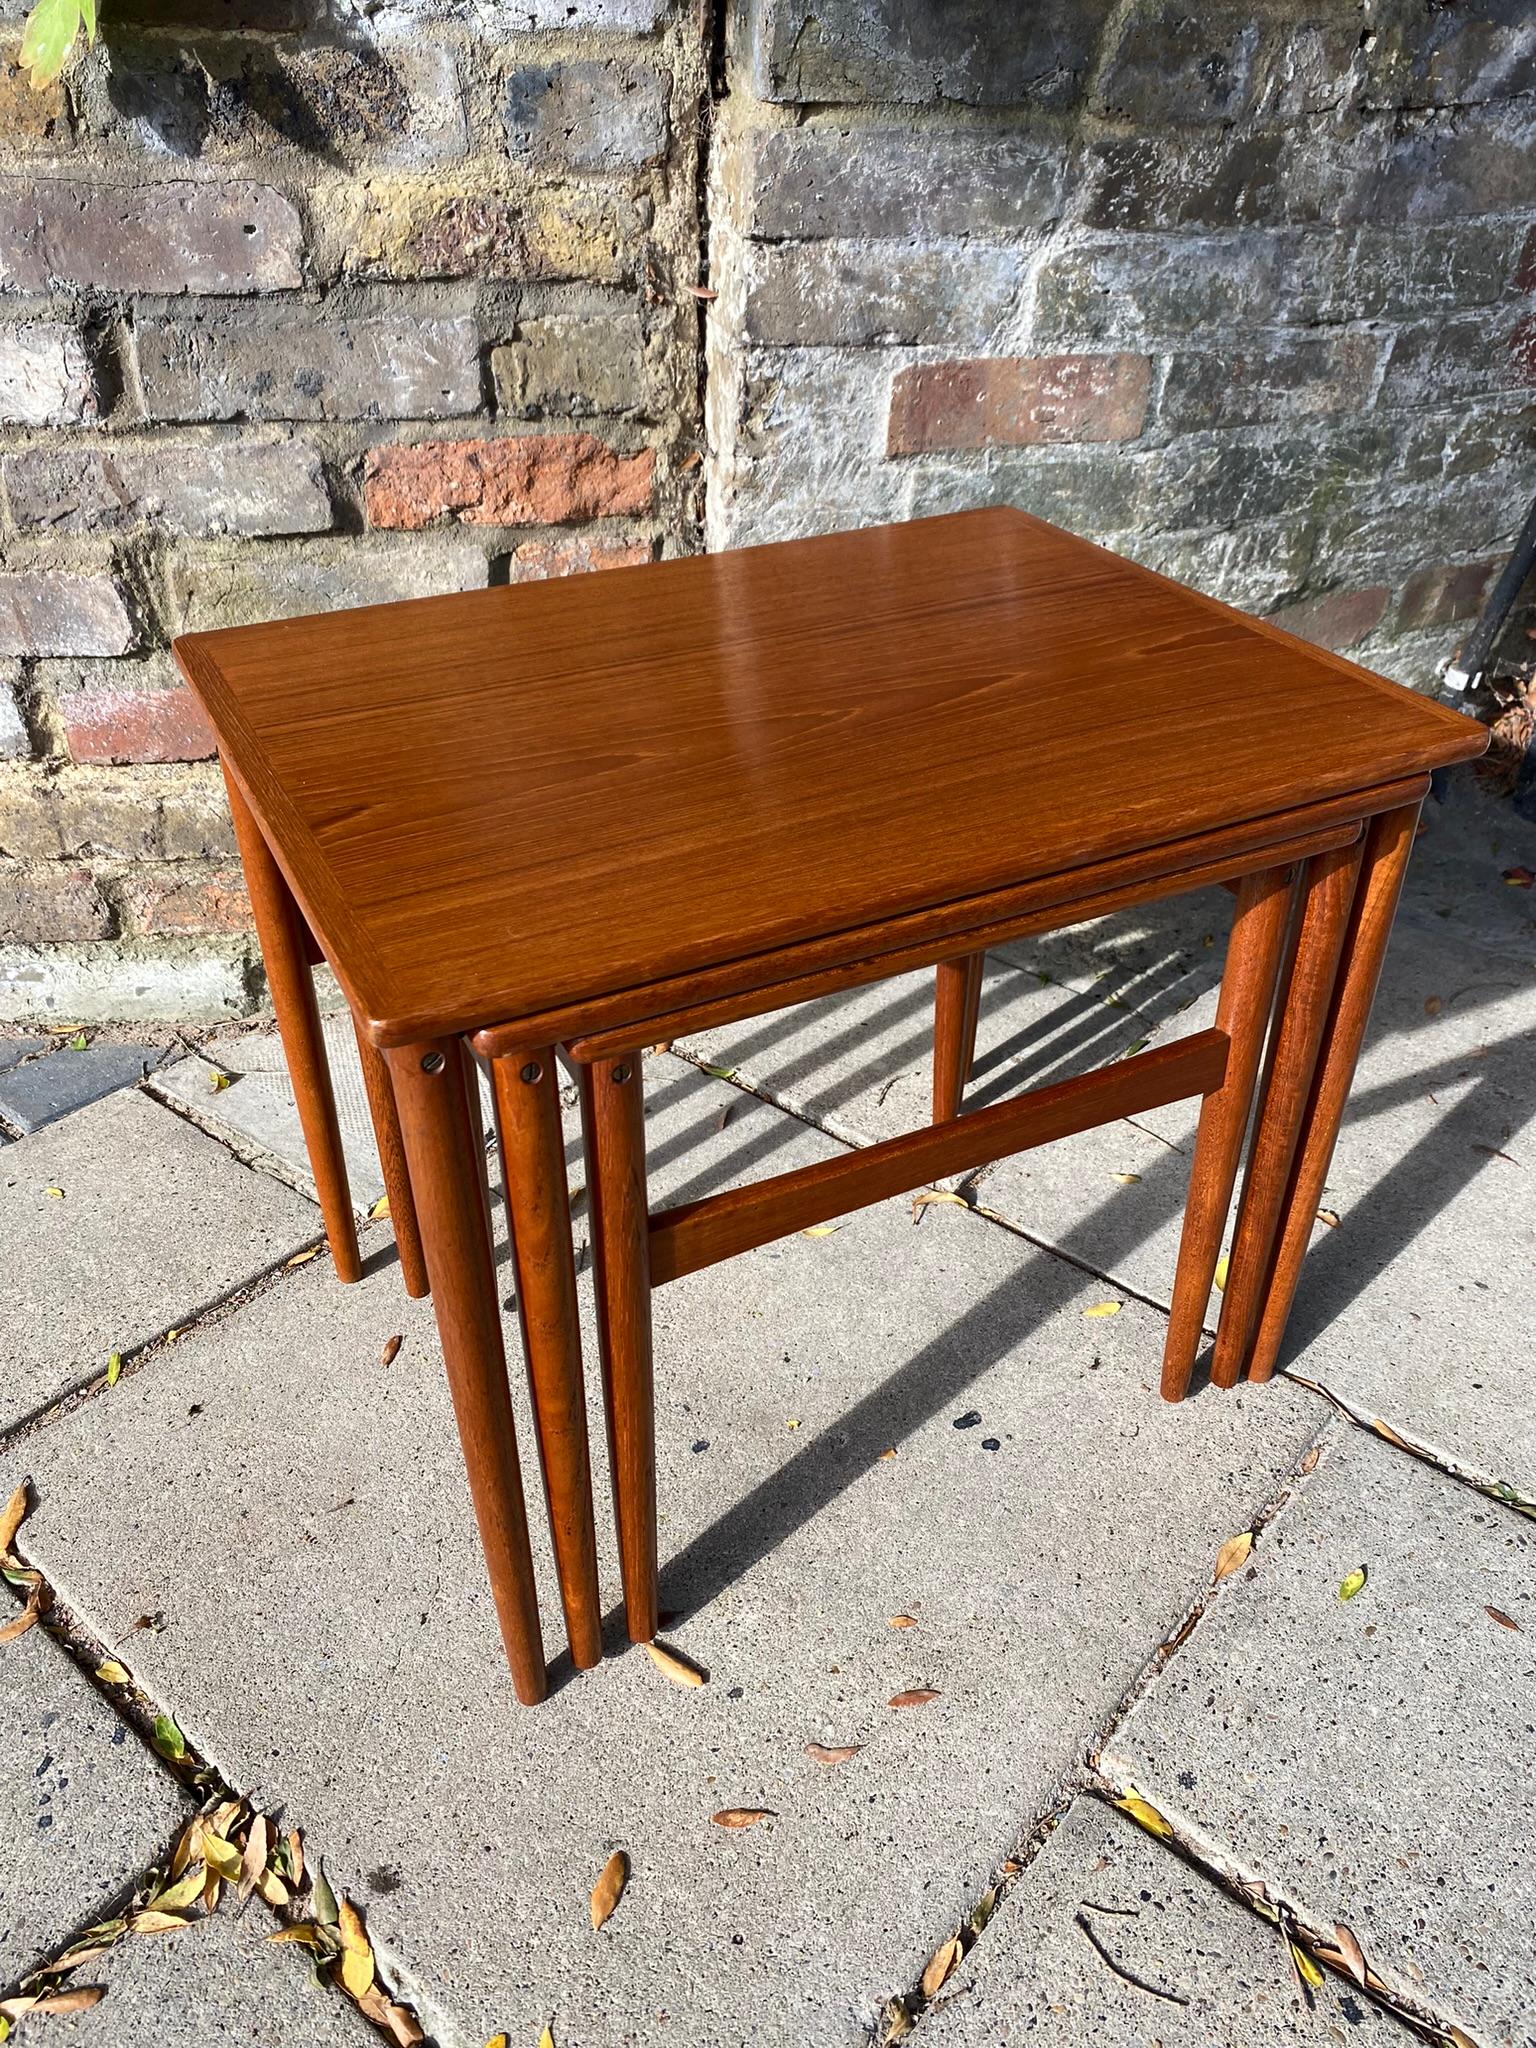 Mid-Century Teak Nest of Tables By Peter Brink for BR Gelsted, Denmark, C. 1960s For Sale 8